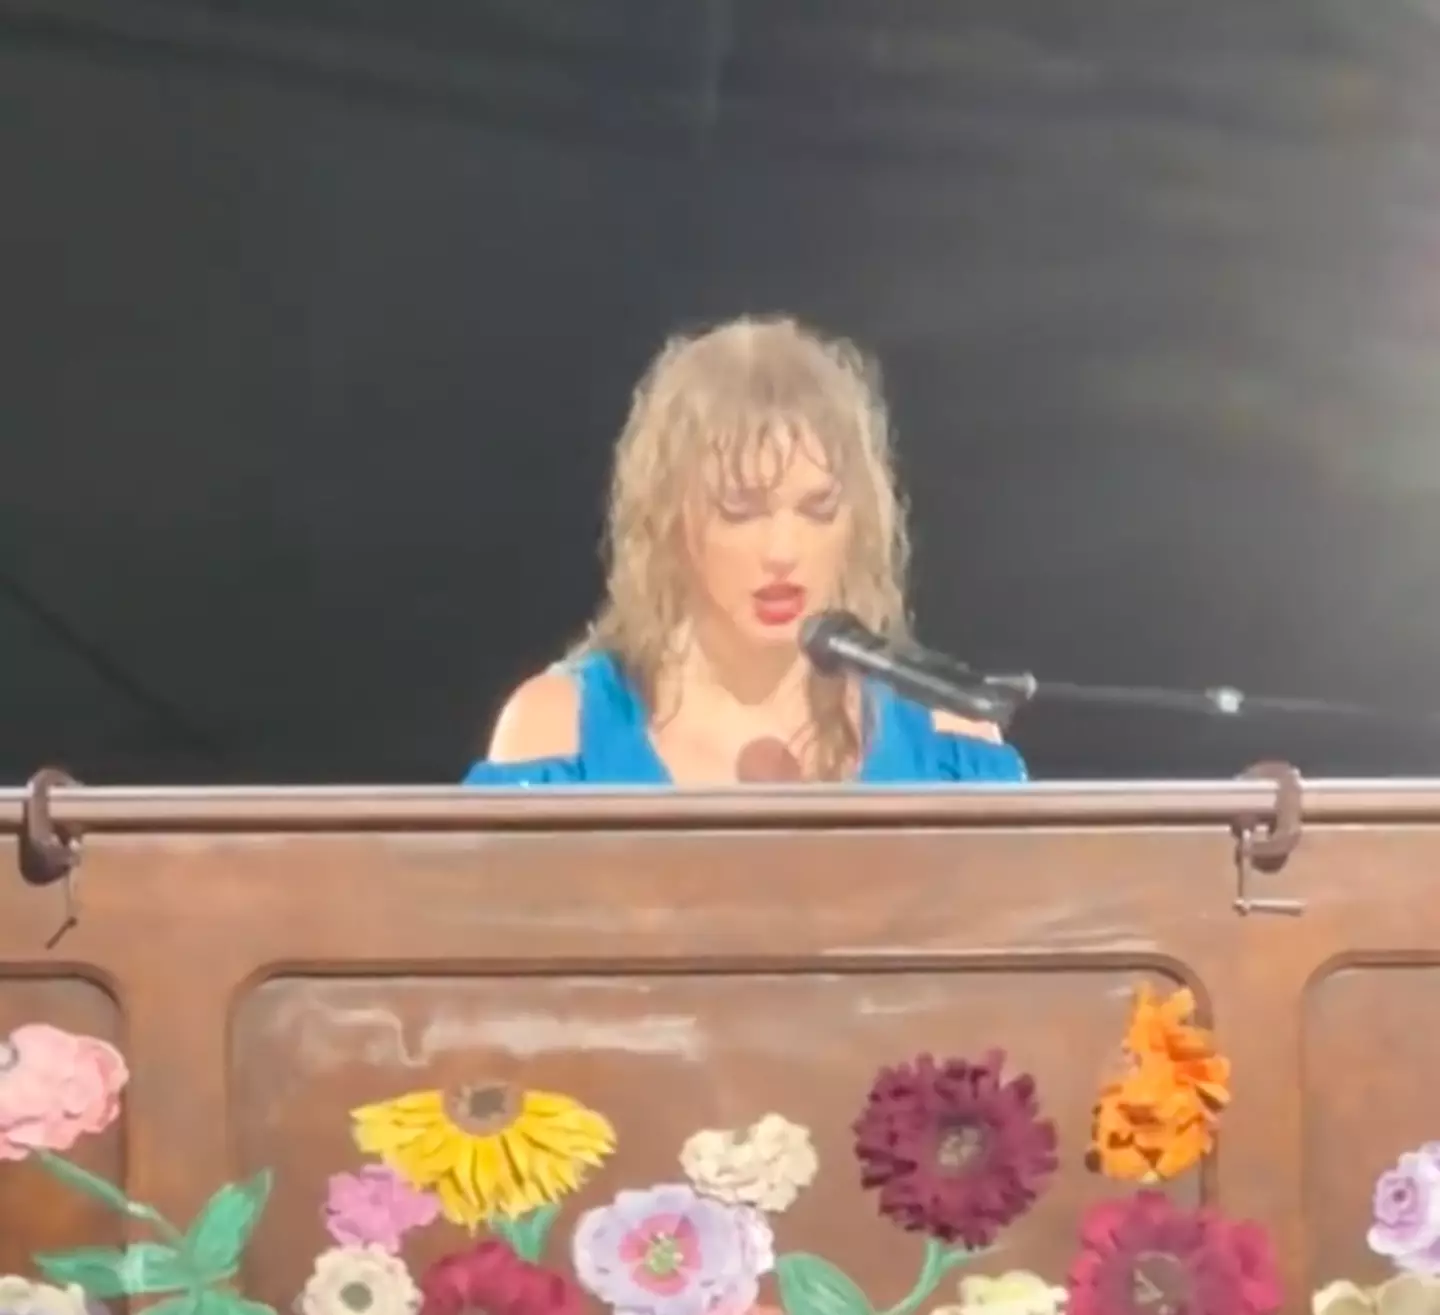 Swift performed an emotional rendition of 'Bigger Than the Whole Sky' on Sunday (19 November).